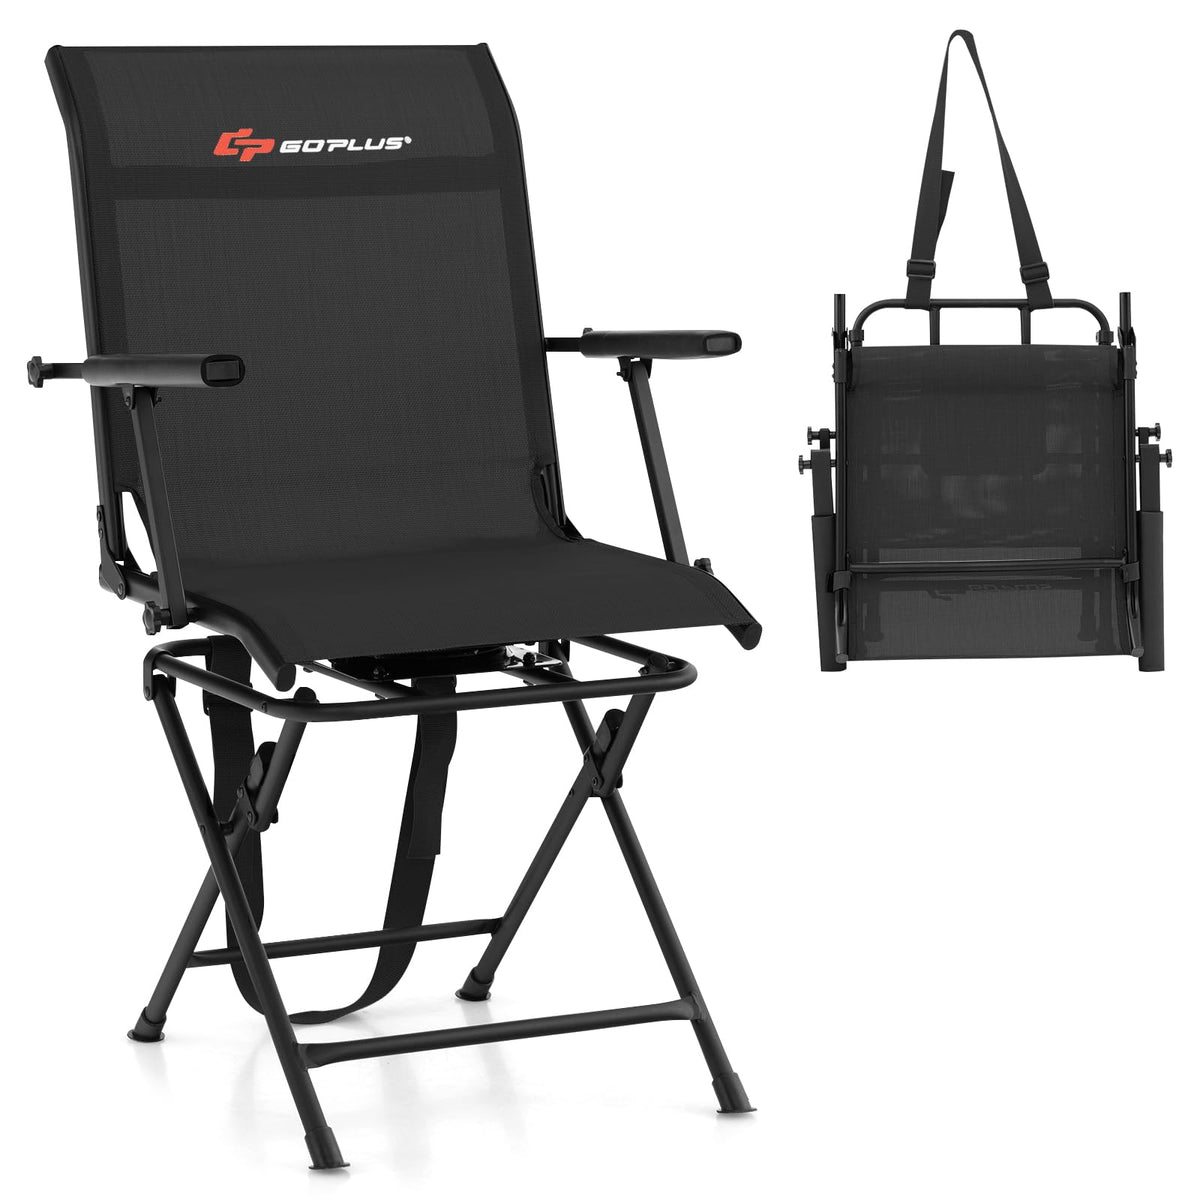 Goplus Hunting Chair, 360°Swivel Hunting Blind Chair with Carrying Strap